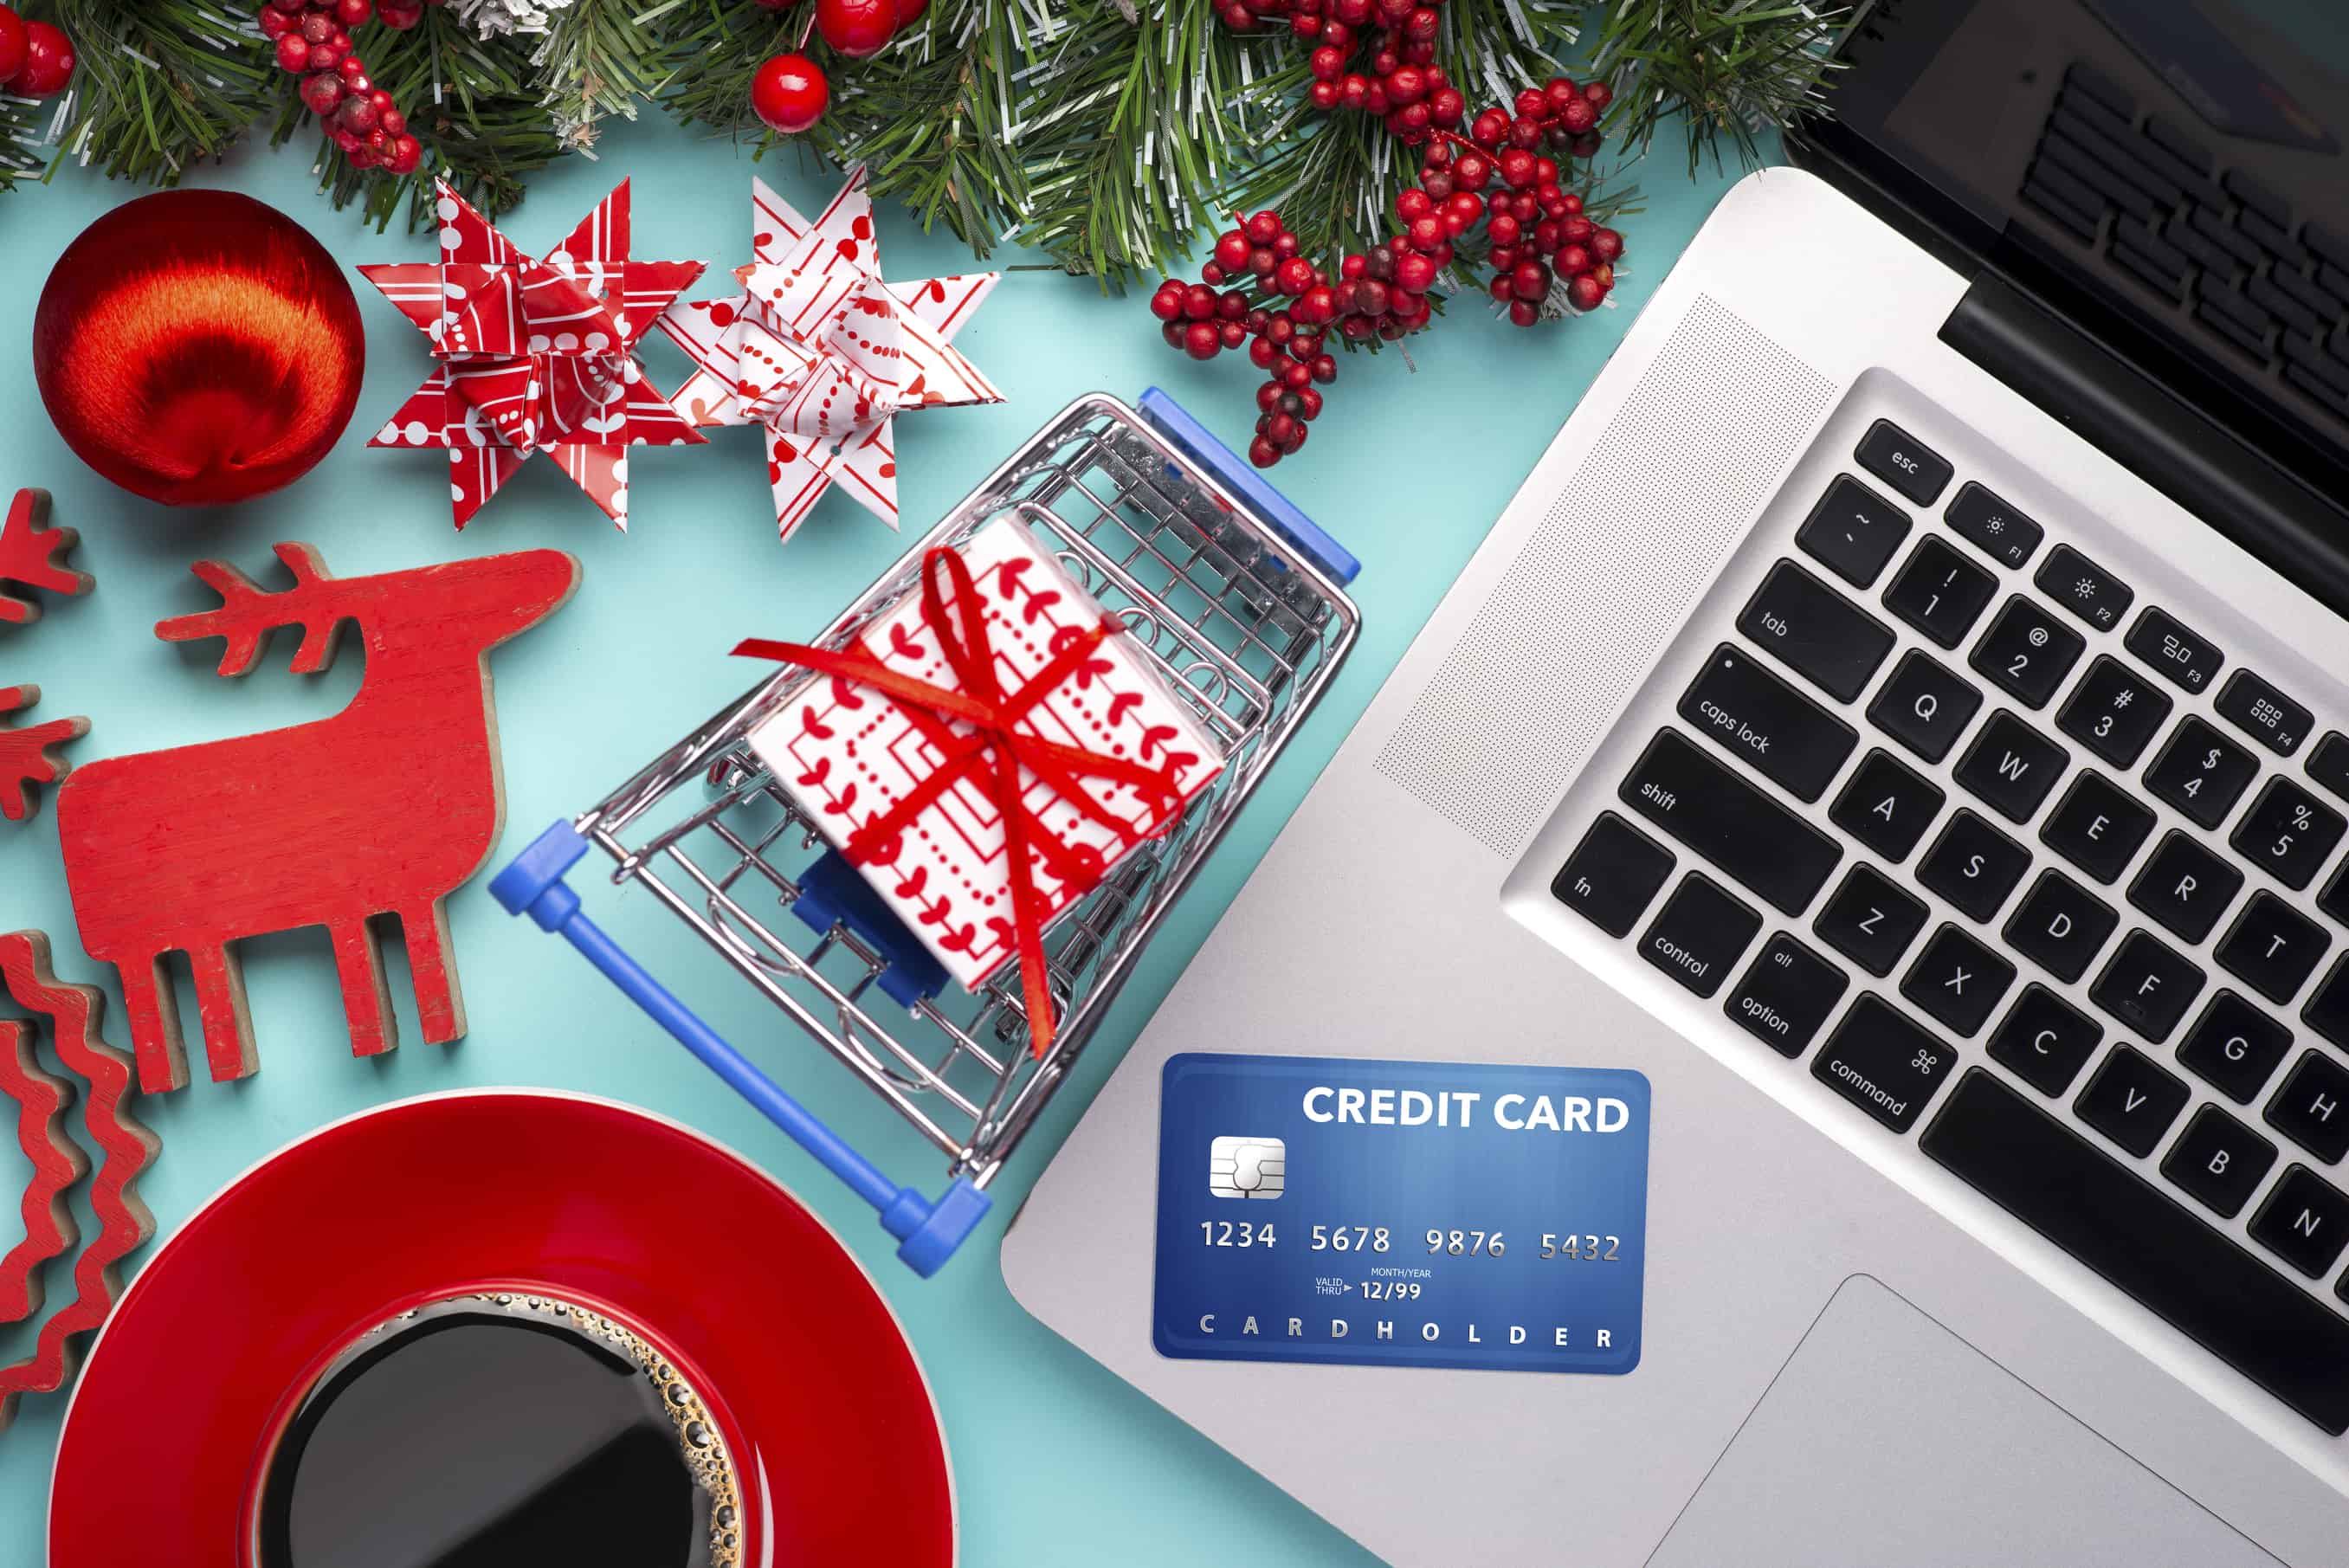 Cyber Monday Special Offers + Short-term and Long-term Advantages